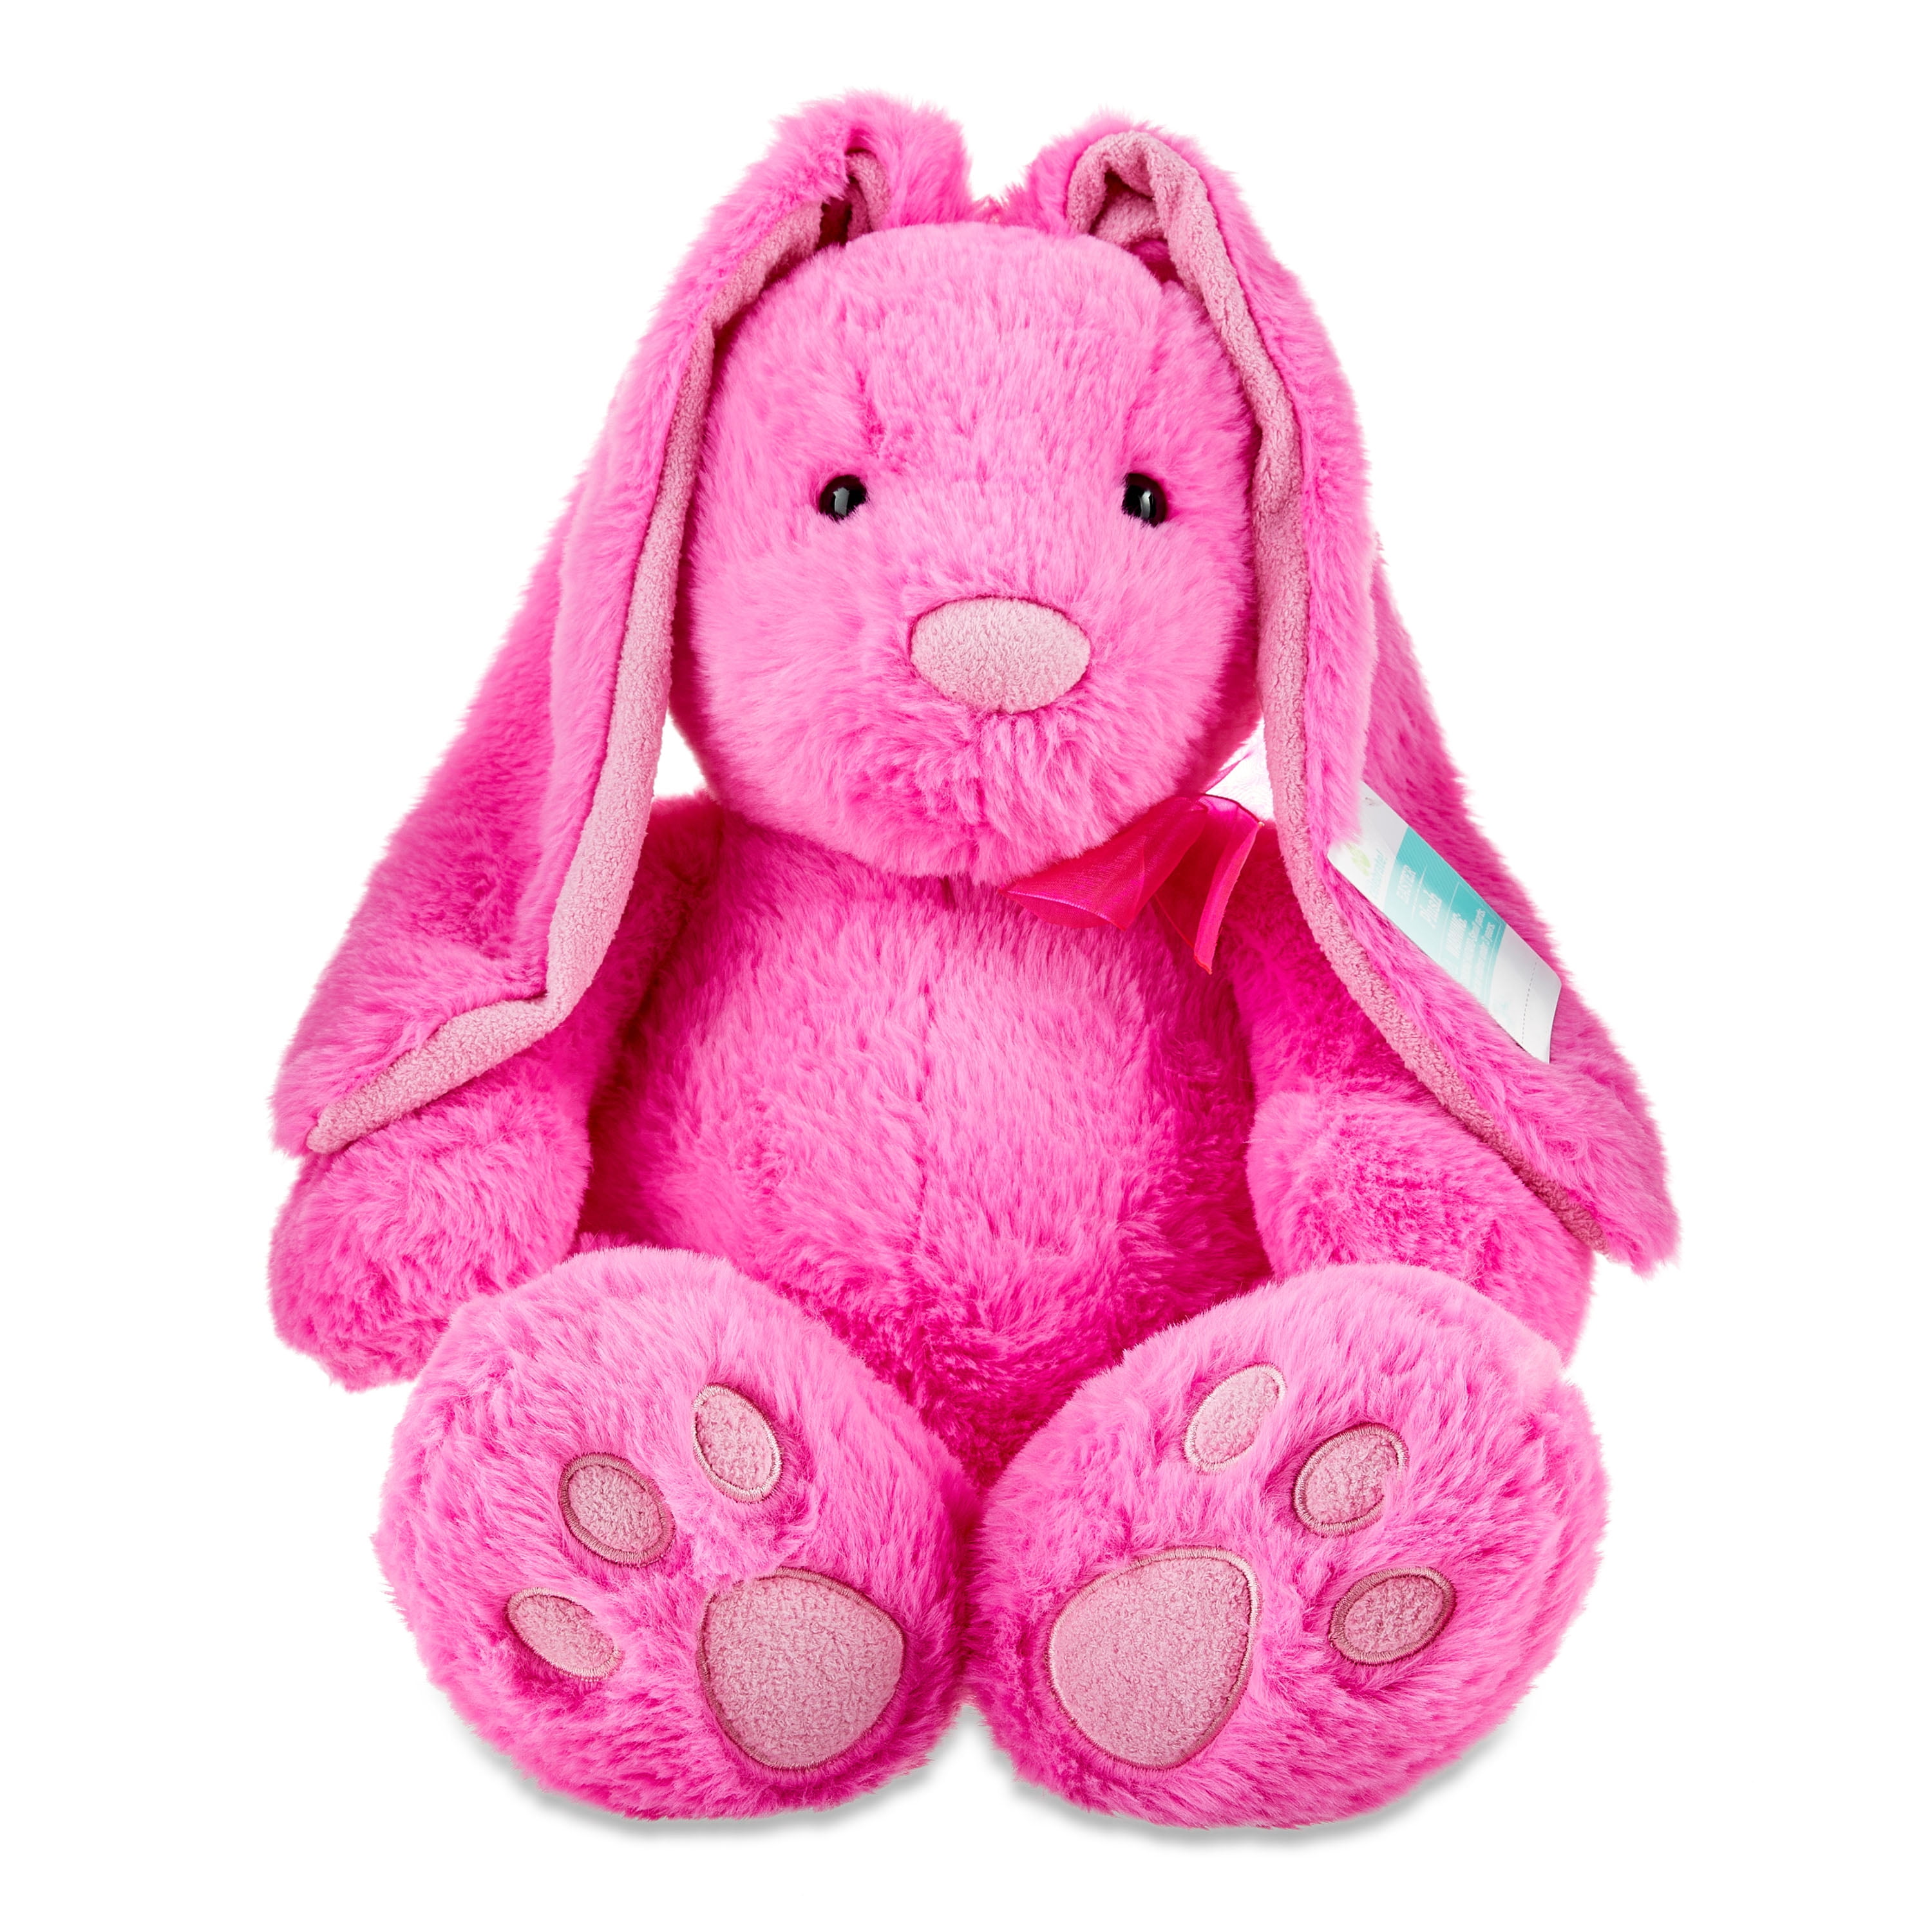 Easter Large Pink Long Ear Bunny Plush, 21 in, by Way To Celebrate